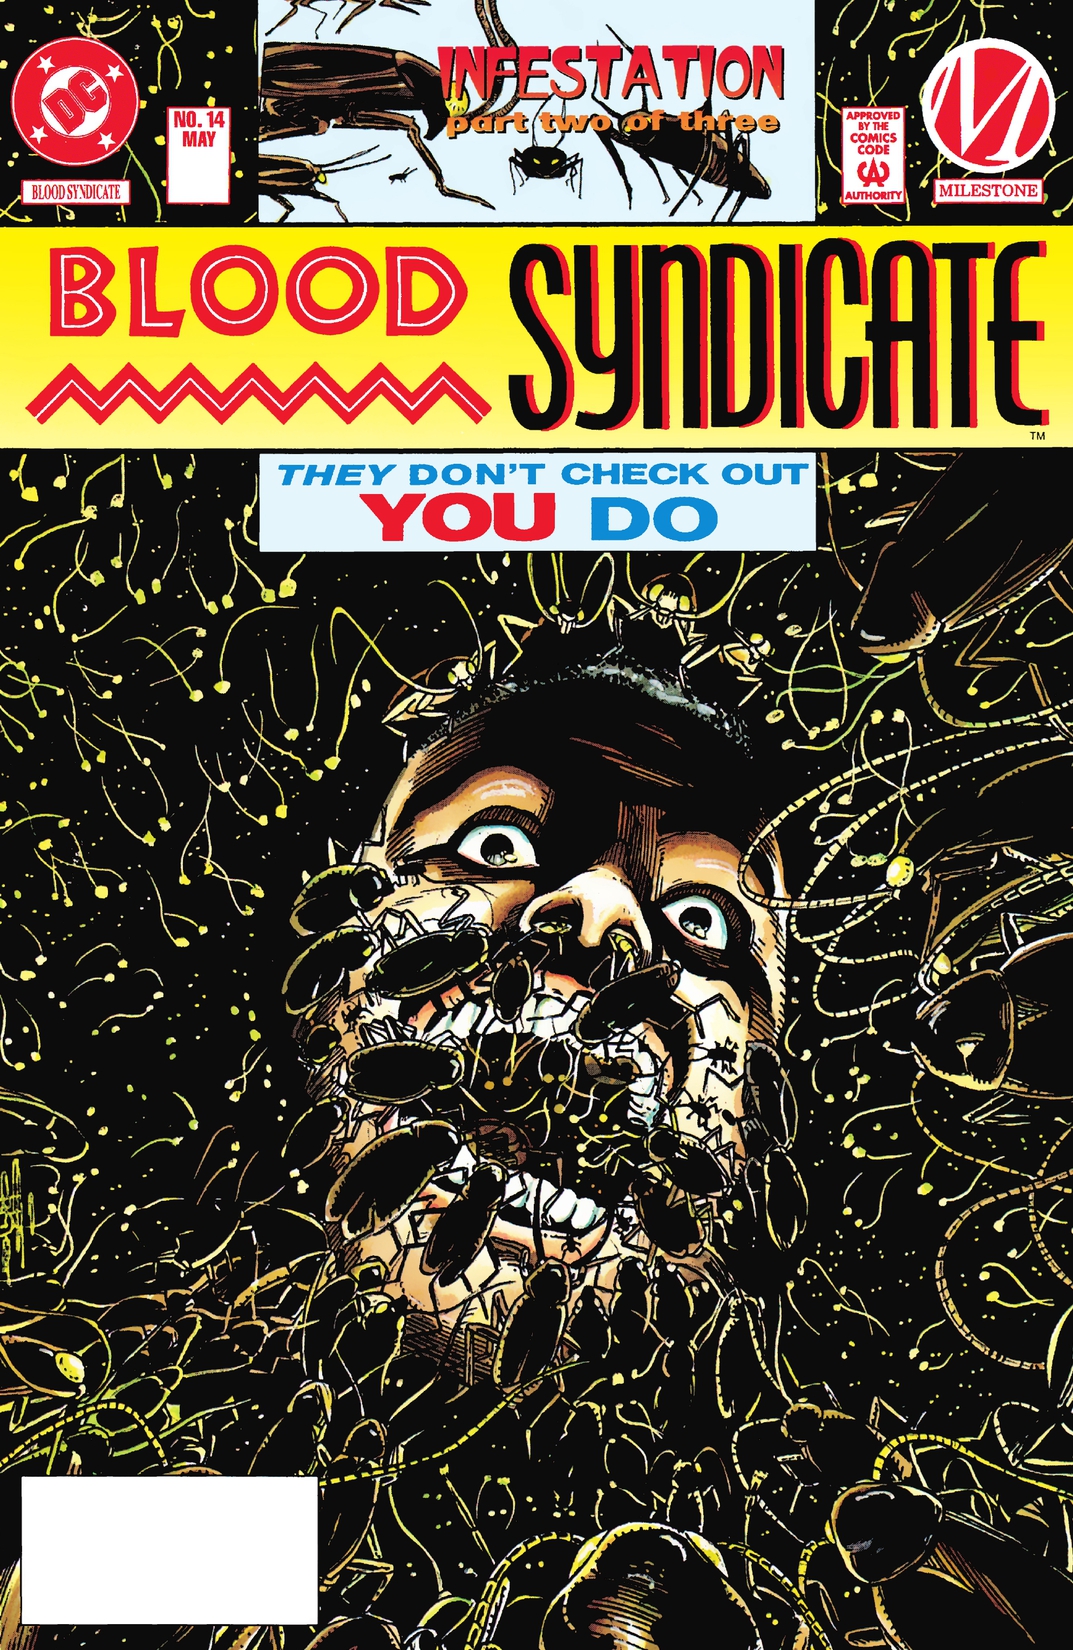 Blood Syndicate #14 preview images